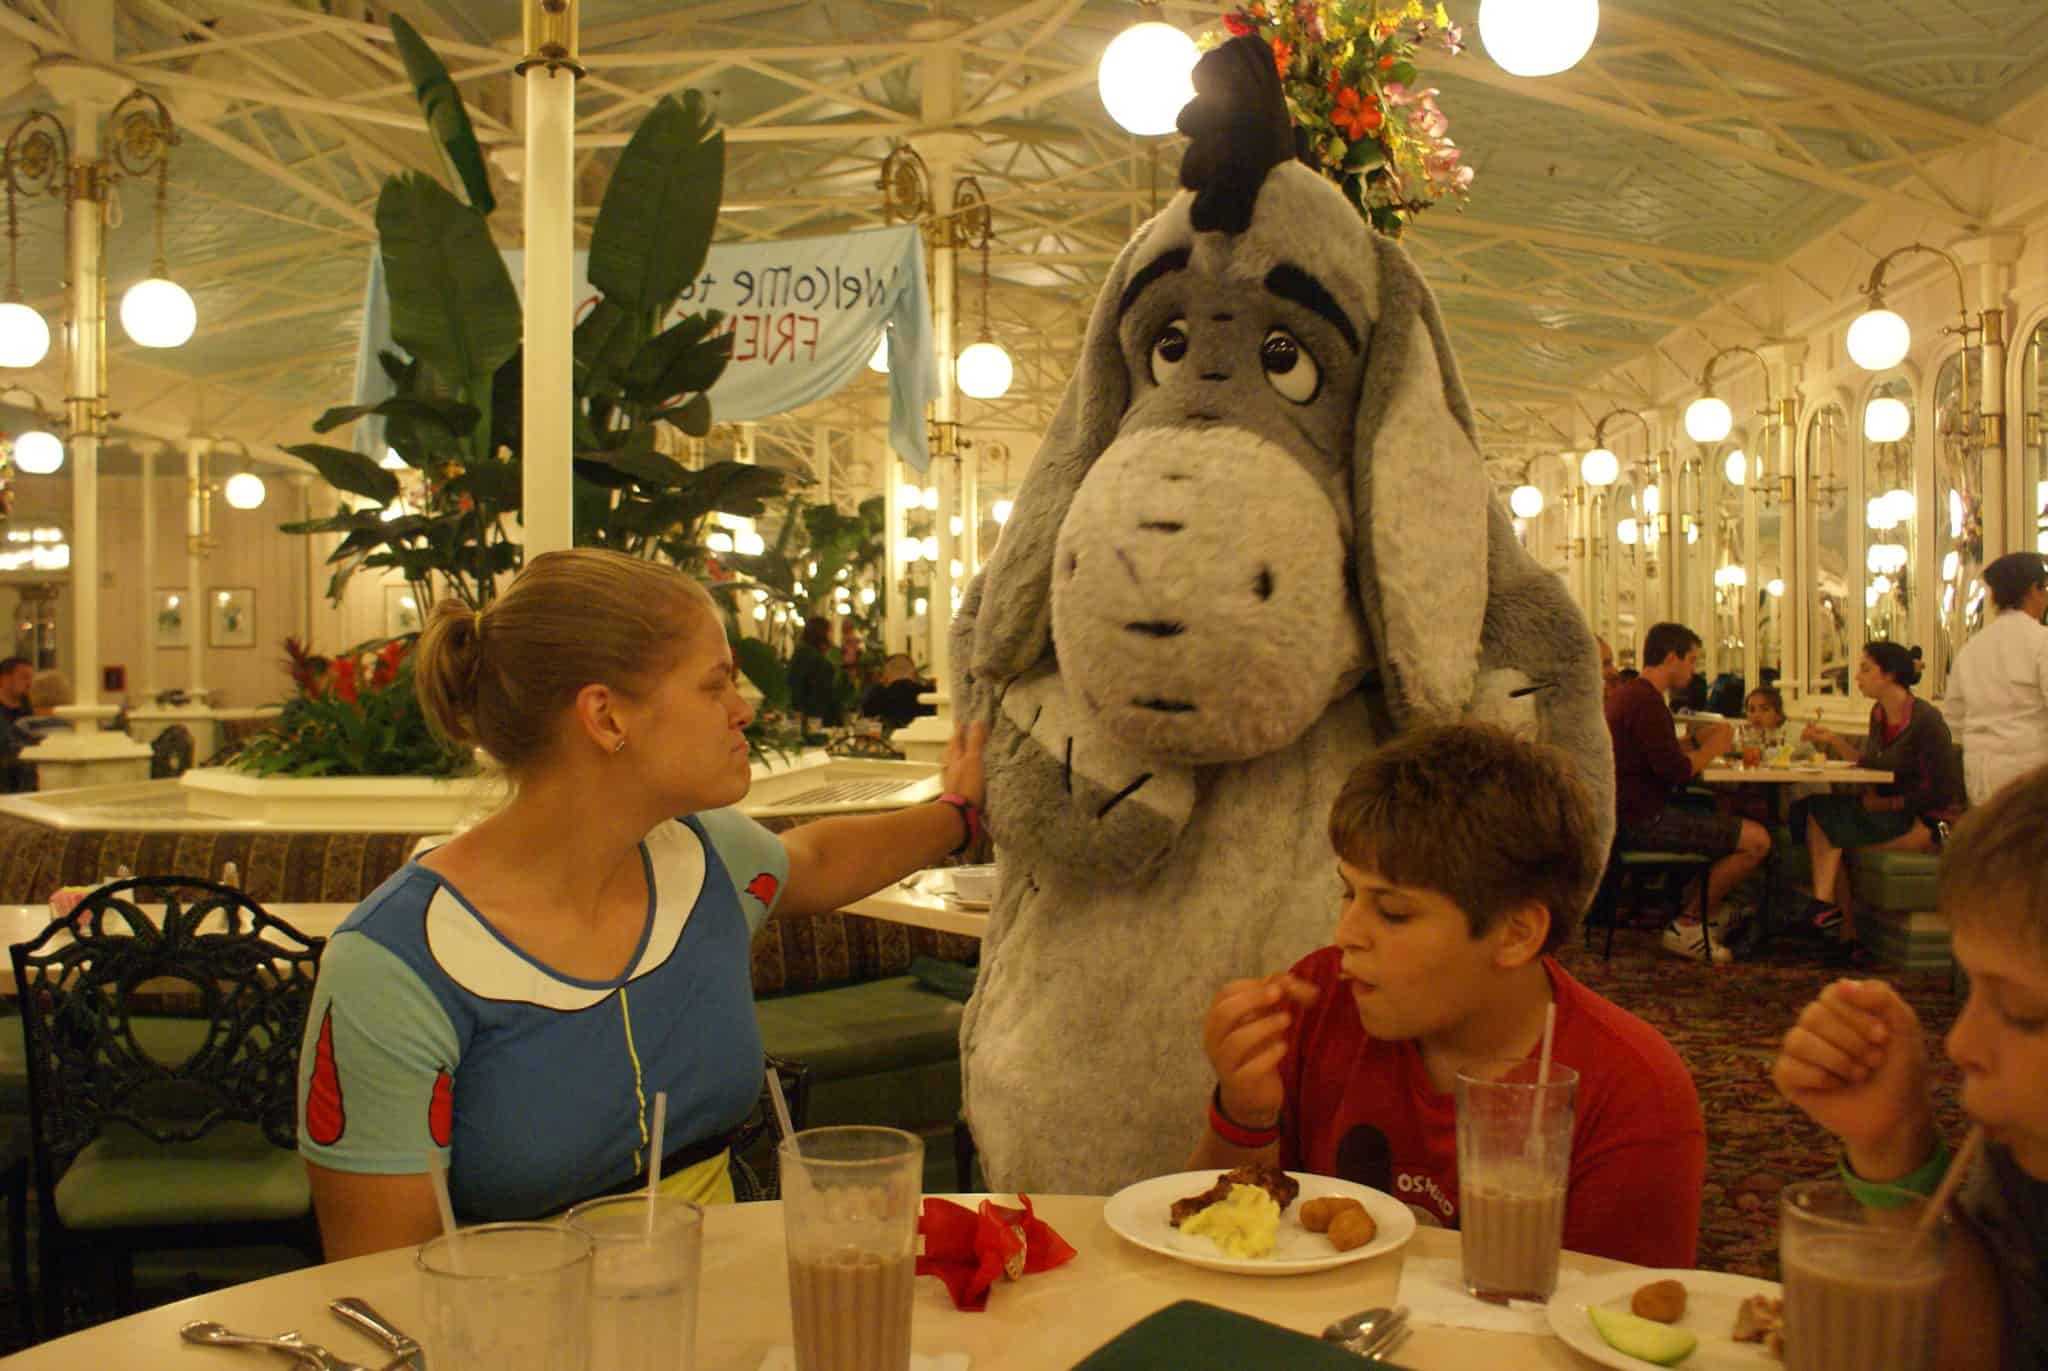 Dinner at Magic Kingdom's Crystal Palace with Winnie--the-Pooh and friends Eeyore